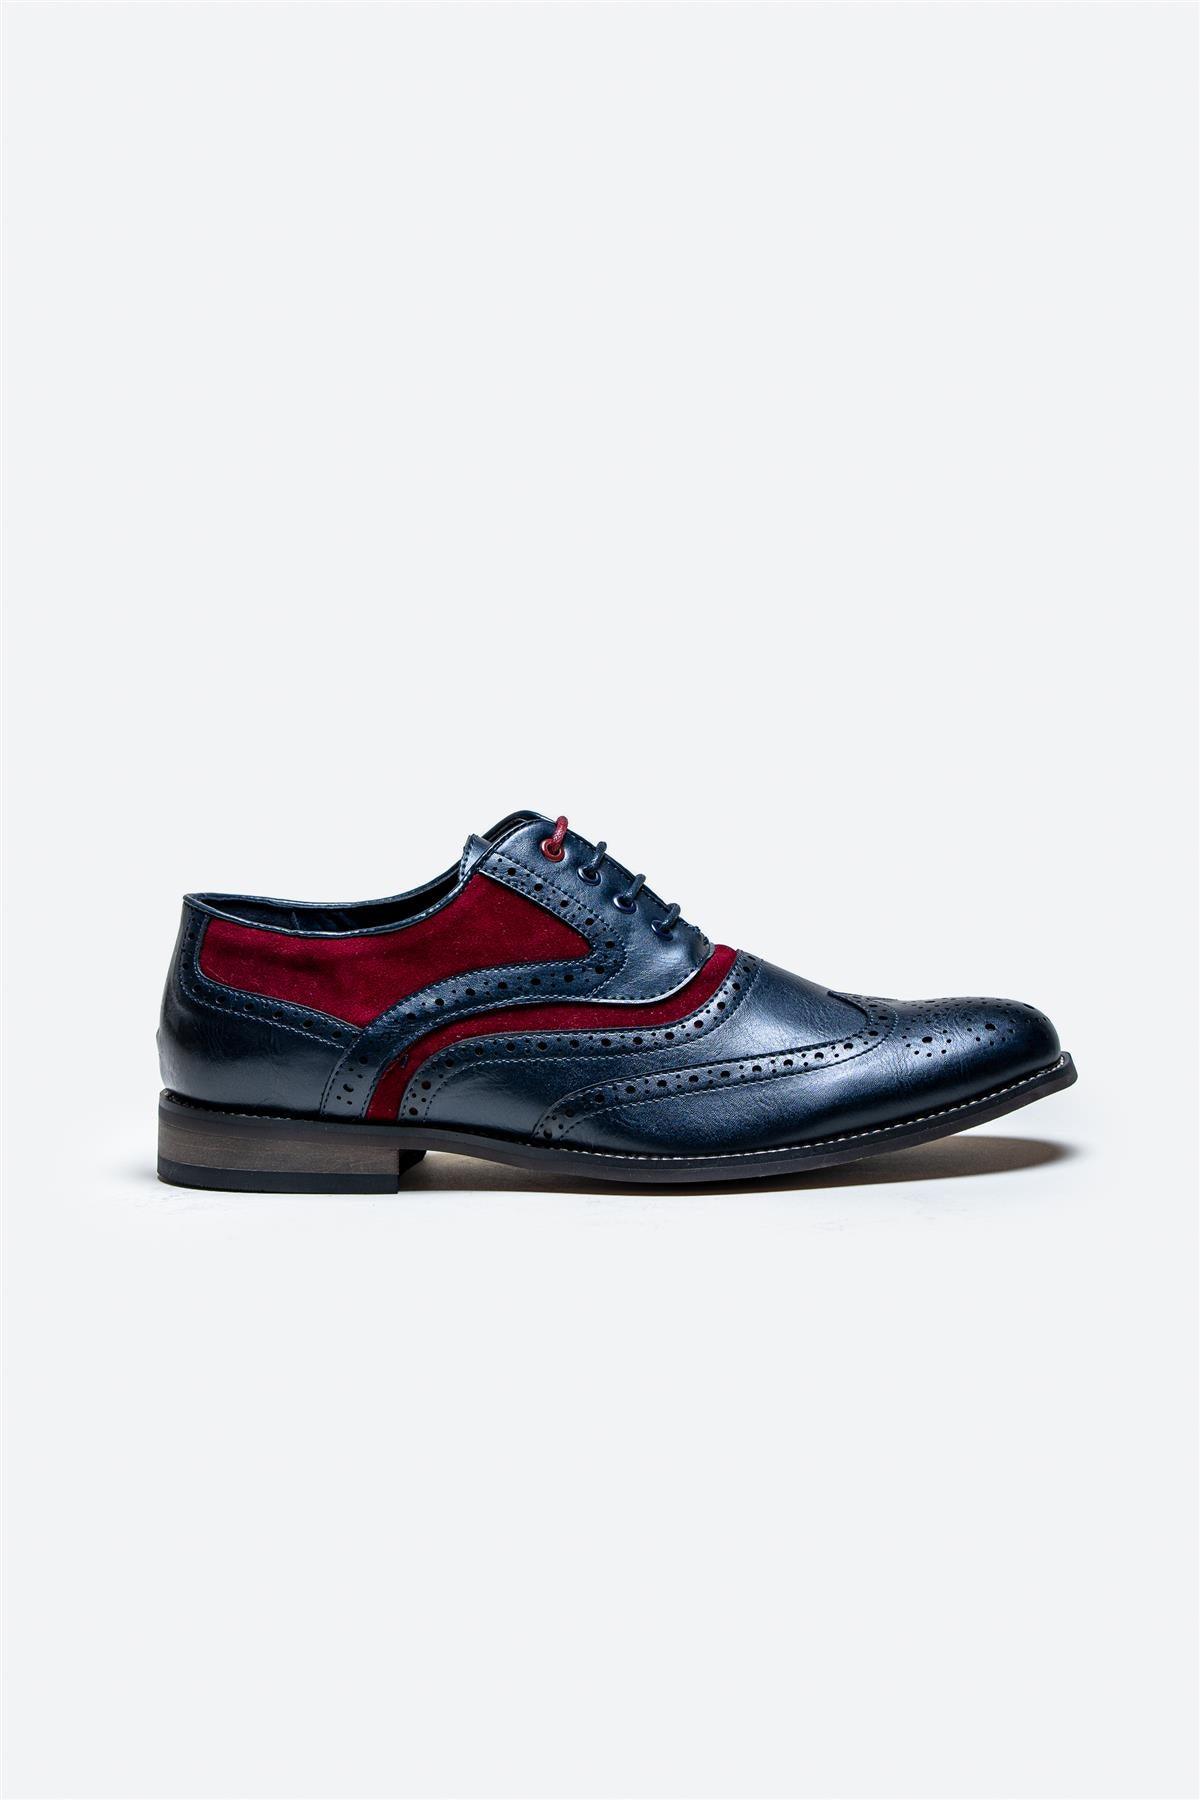 Russel navy/red shoe side